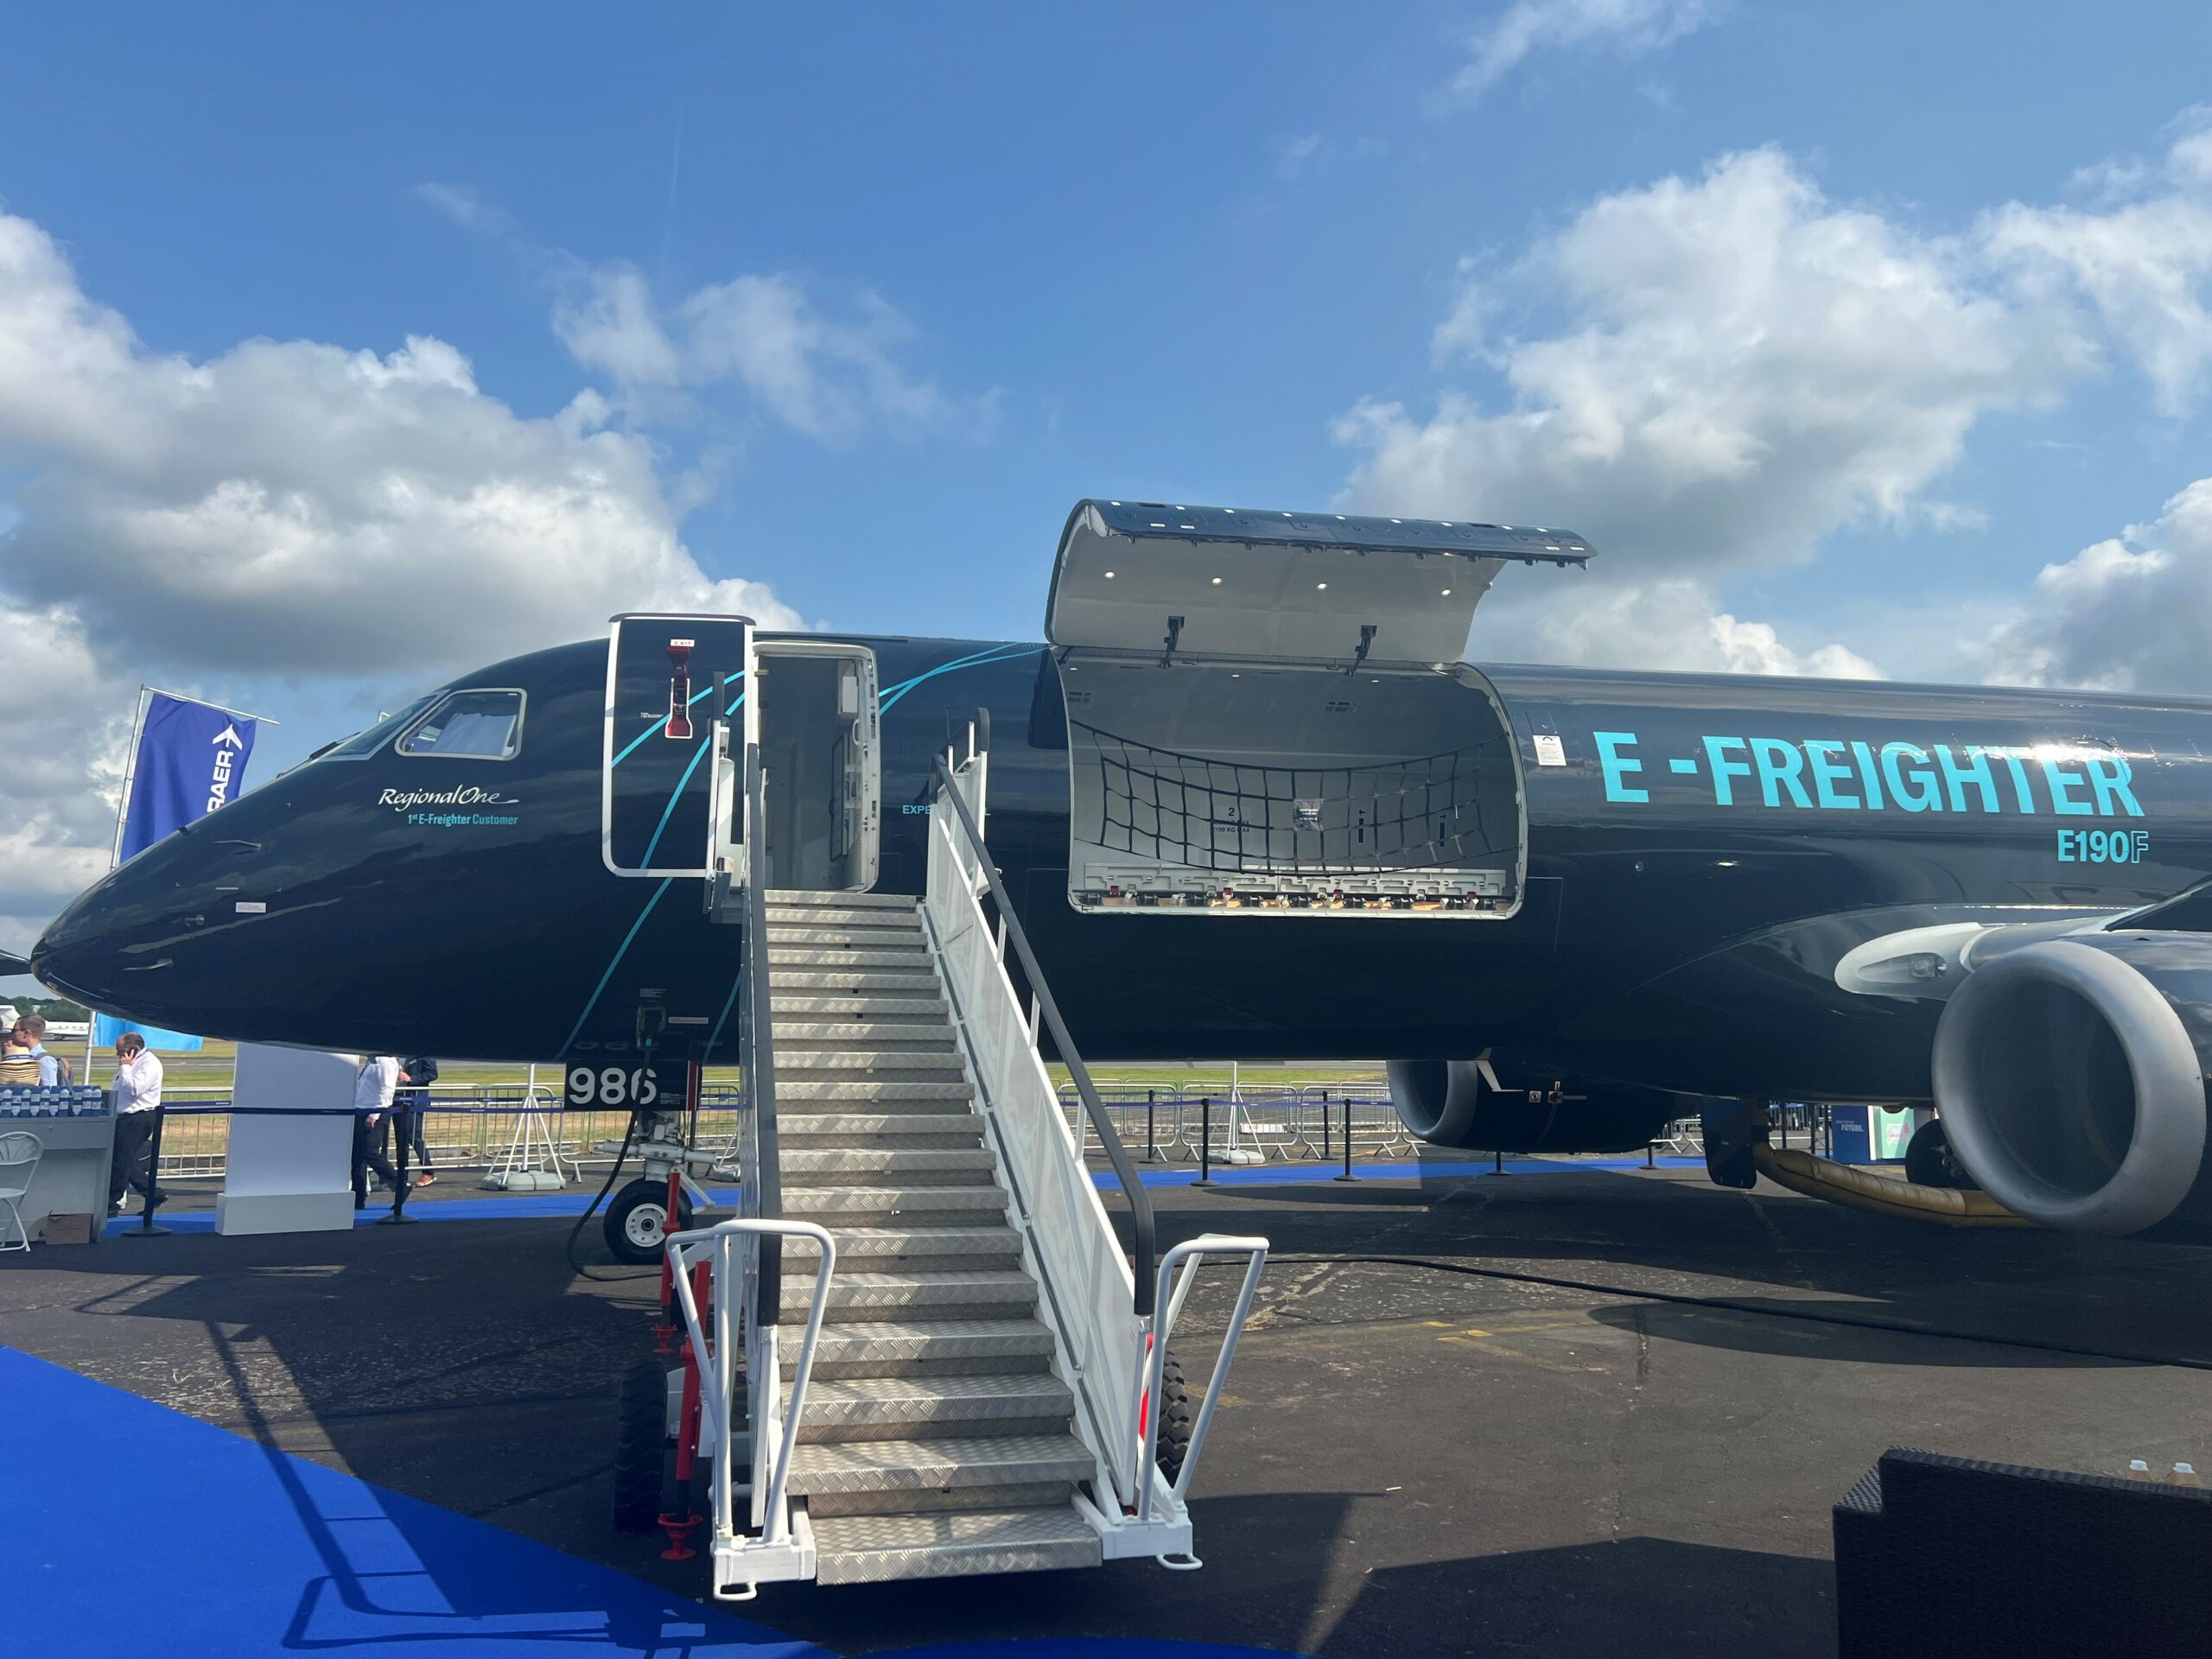 Embraer receives Brazilian ANAC certification for E190 freighter